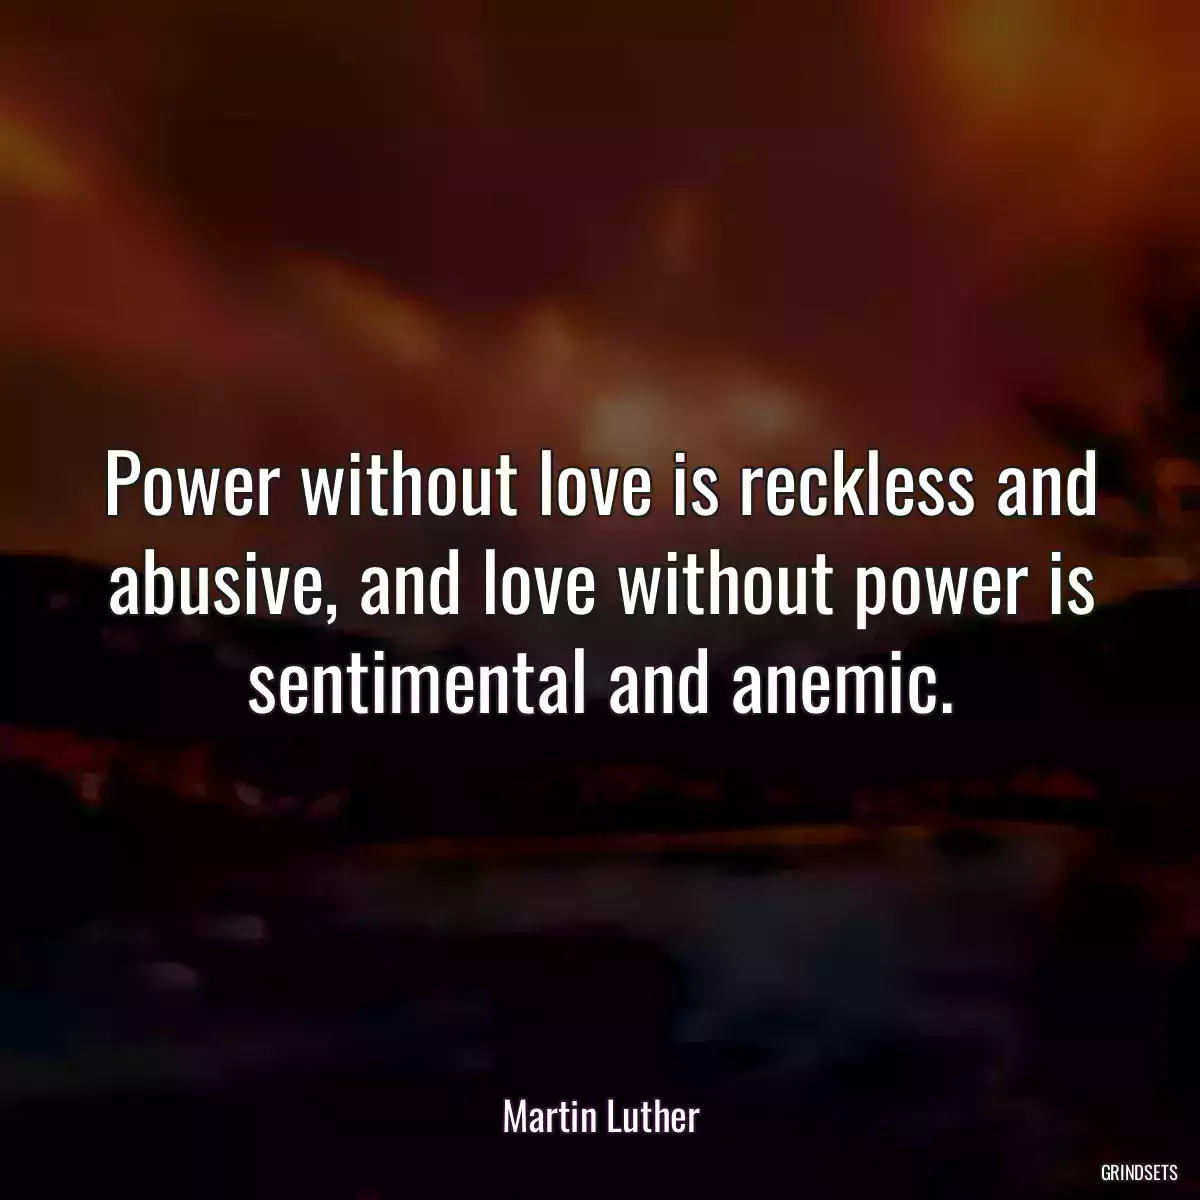 Power without love is reckless and abusive, and love without power is sentimental and anemic.